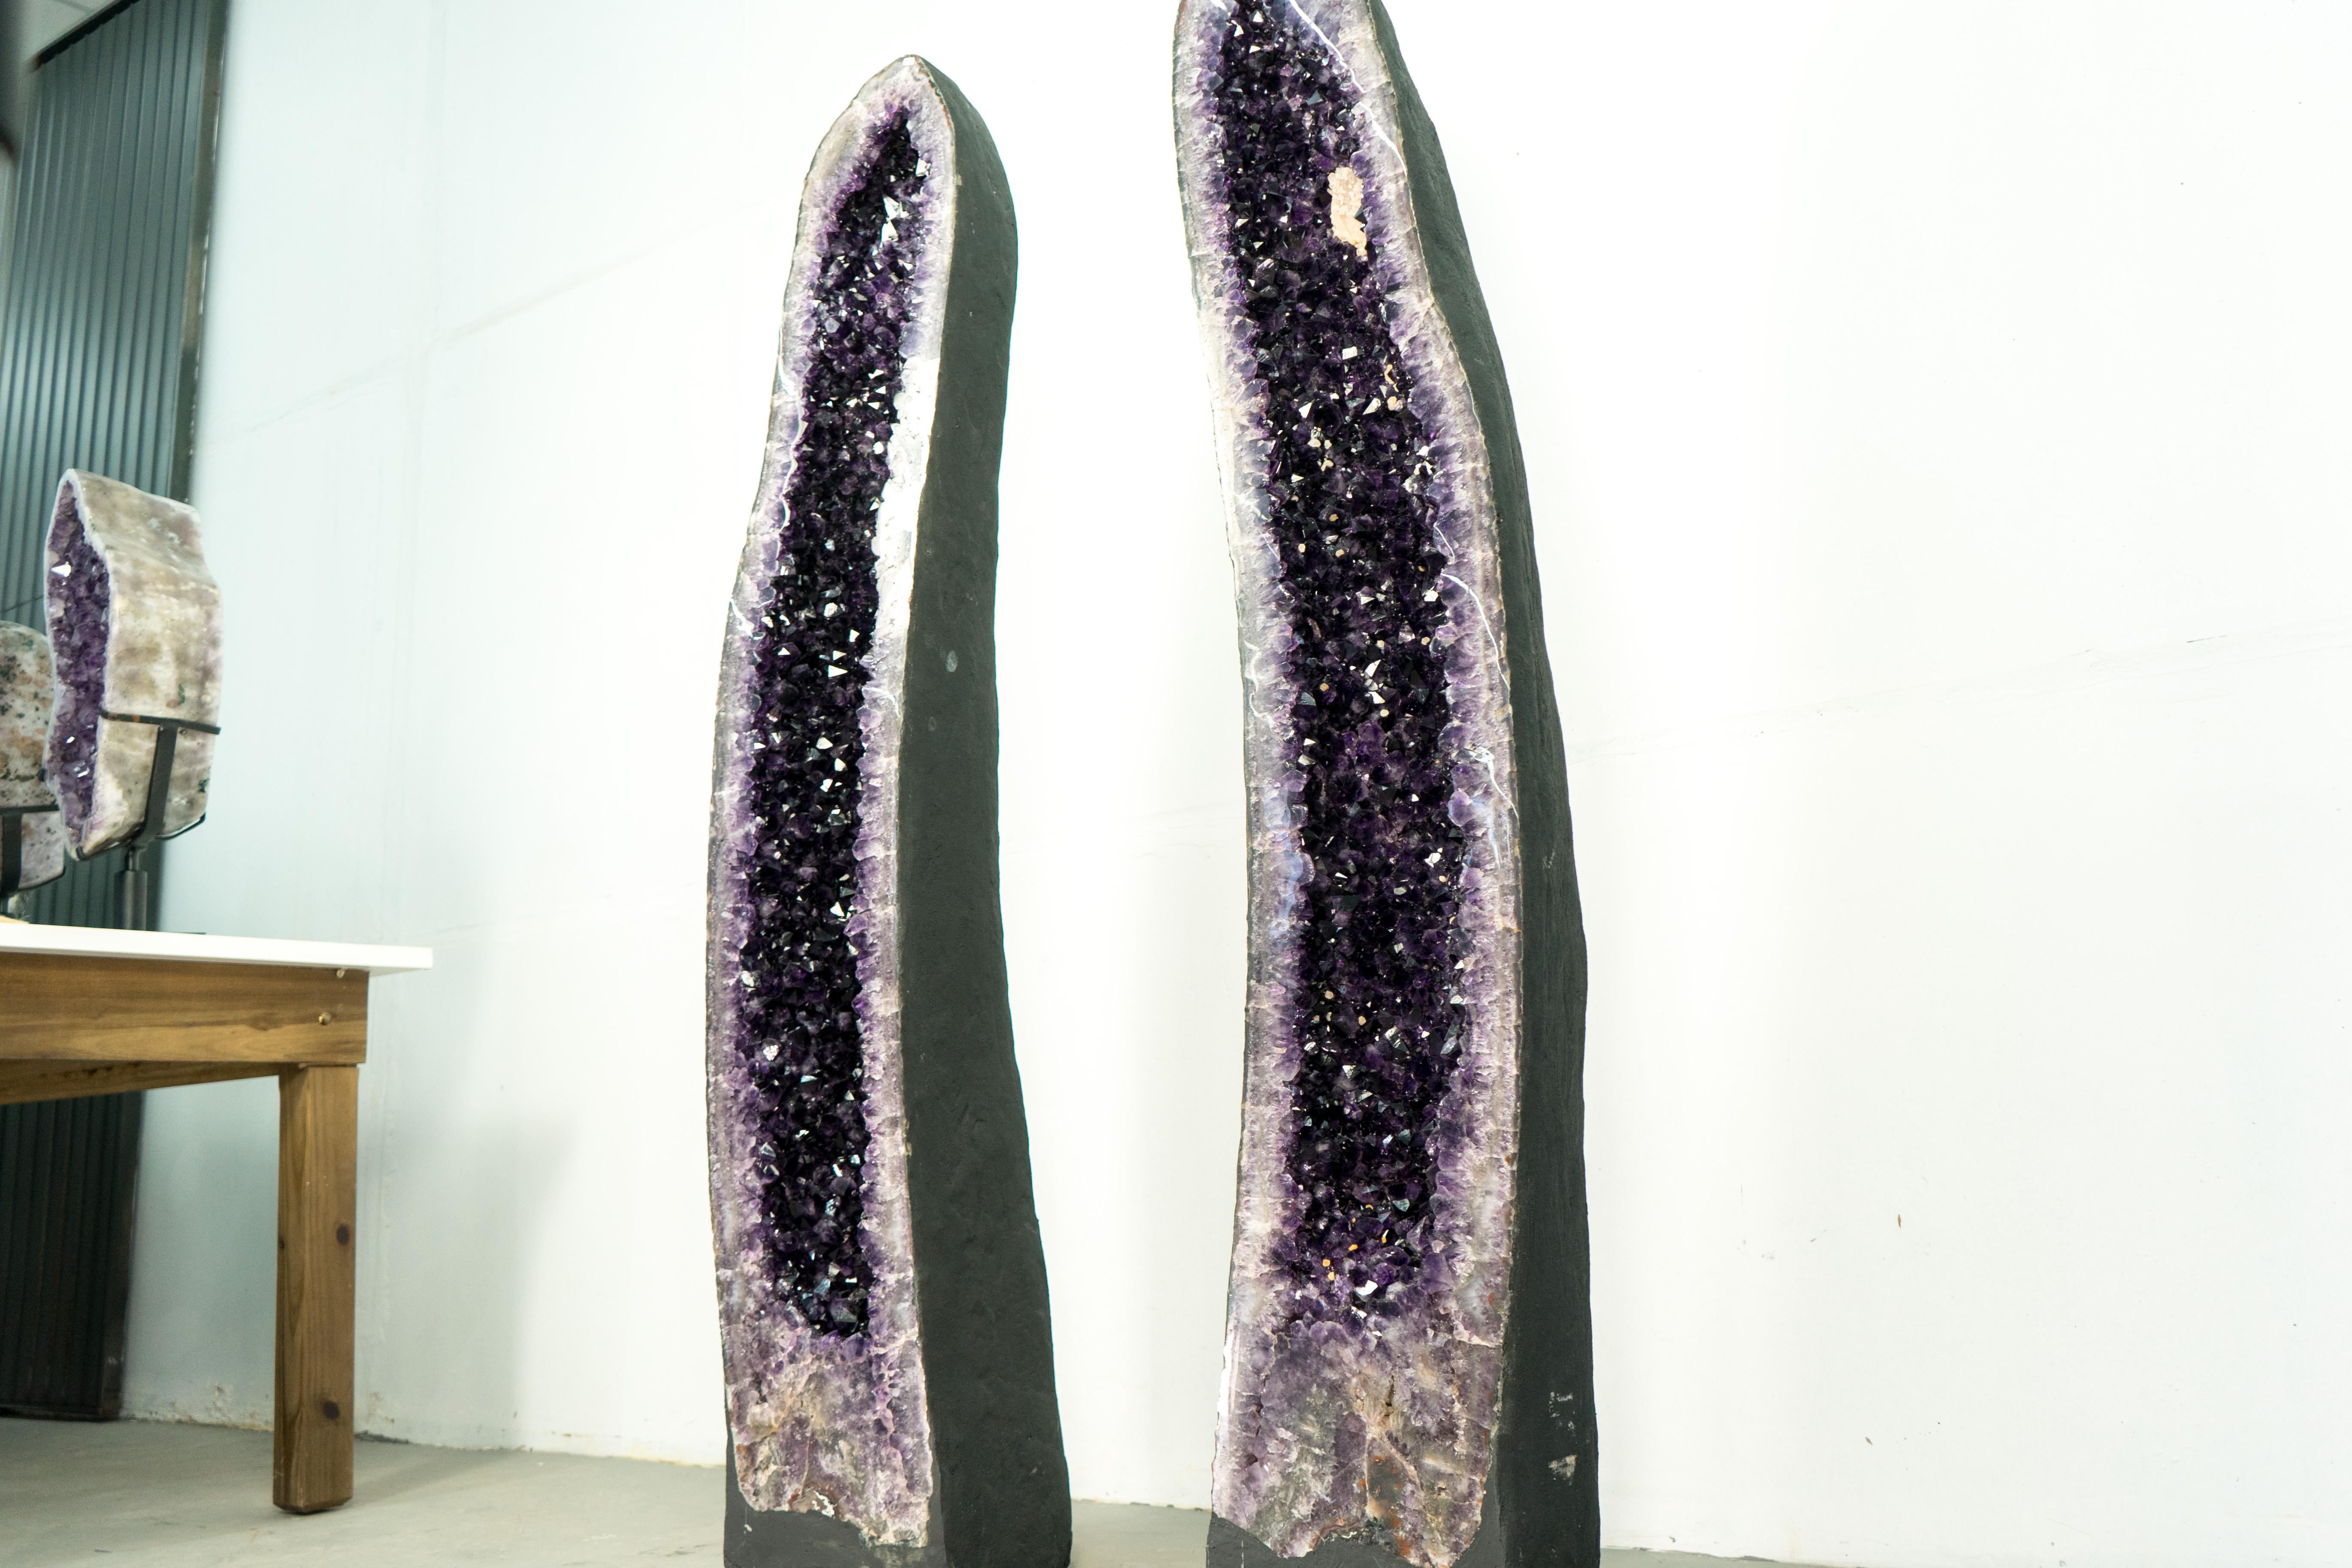 Pair of High-Grade Giant Amethyst Cathedral Geodes with Calcite - 6 Ft Tall In New Condition For Sale In Ametista Do Sul, BR